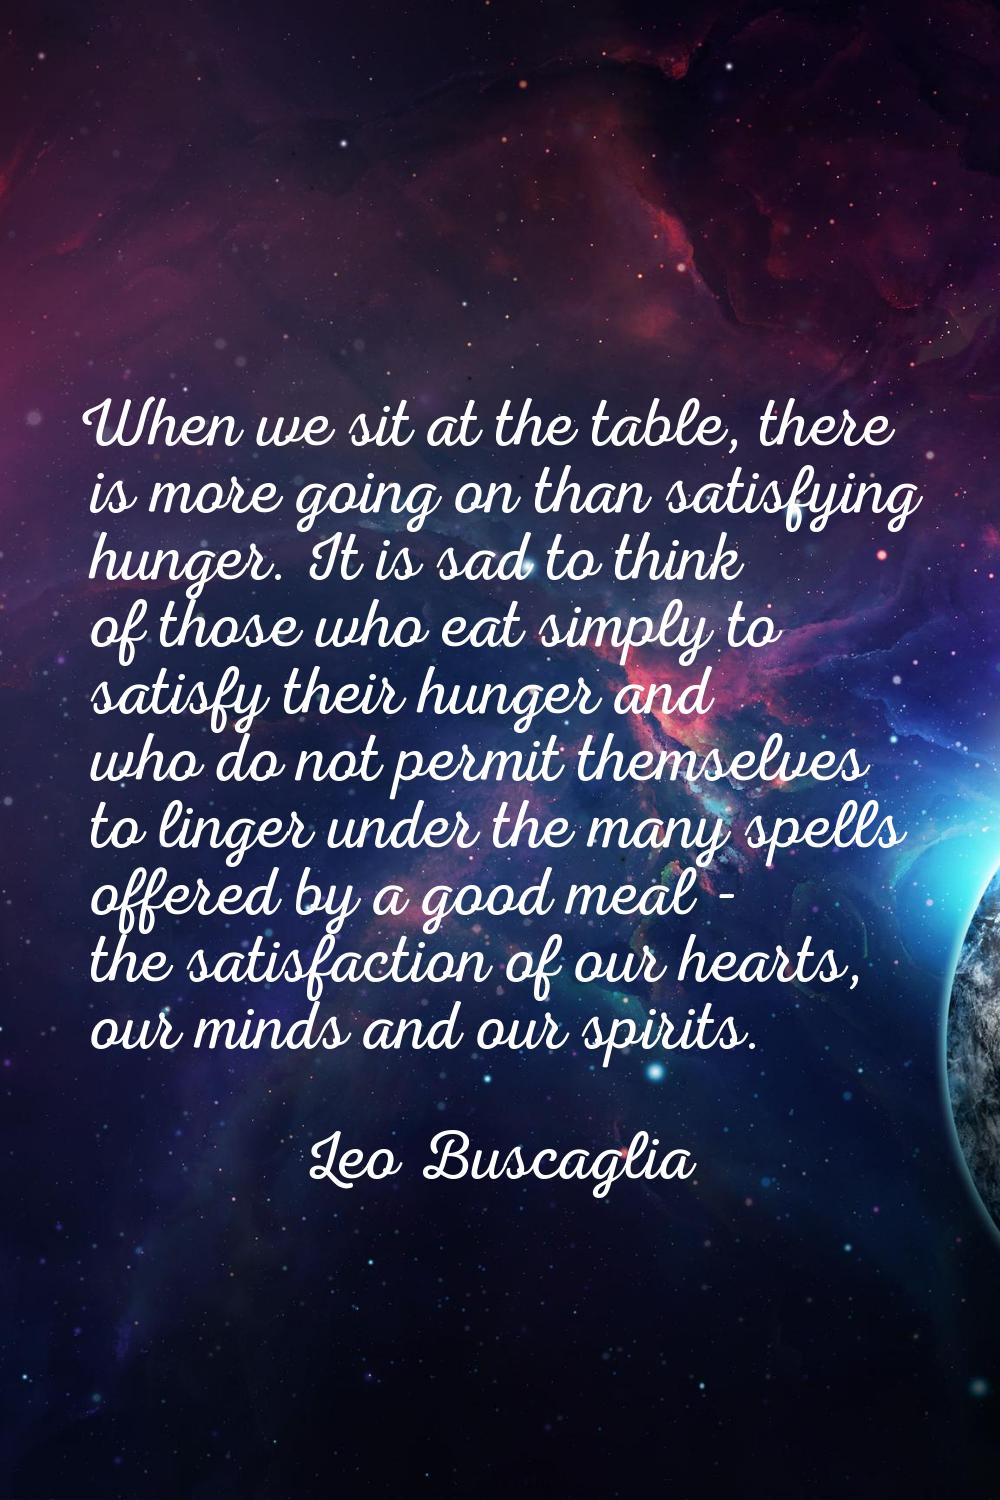 When we sit at the table, there is more going on than satisfying hunger. It is sad to think of thos